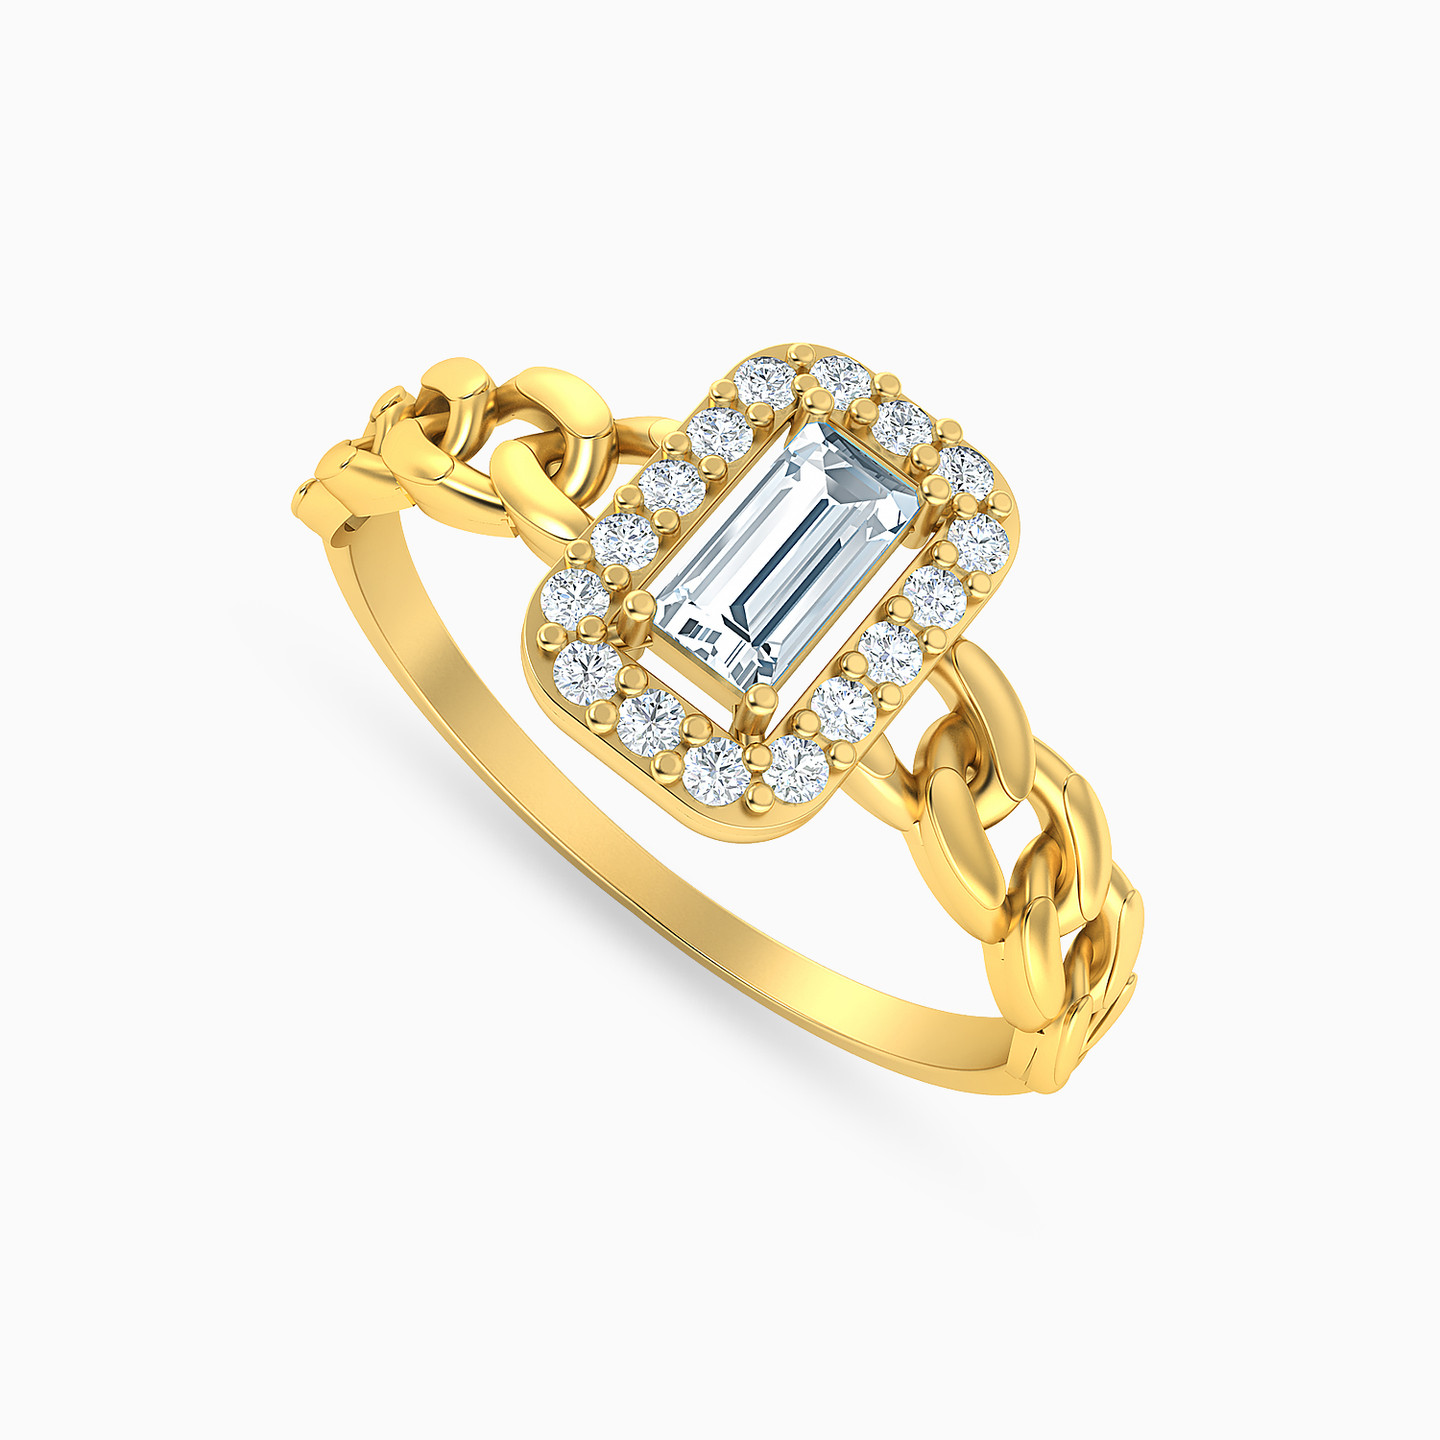 18K Gold Colored Stones Statement Ring - 2